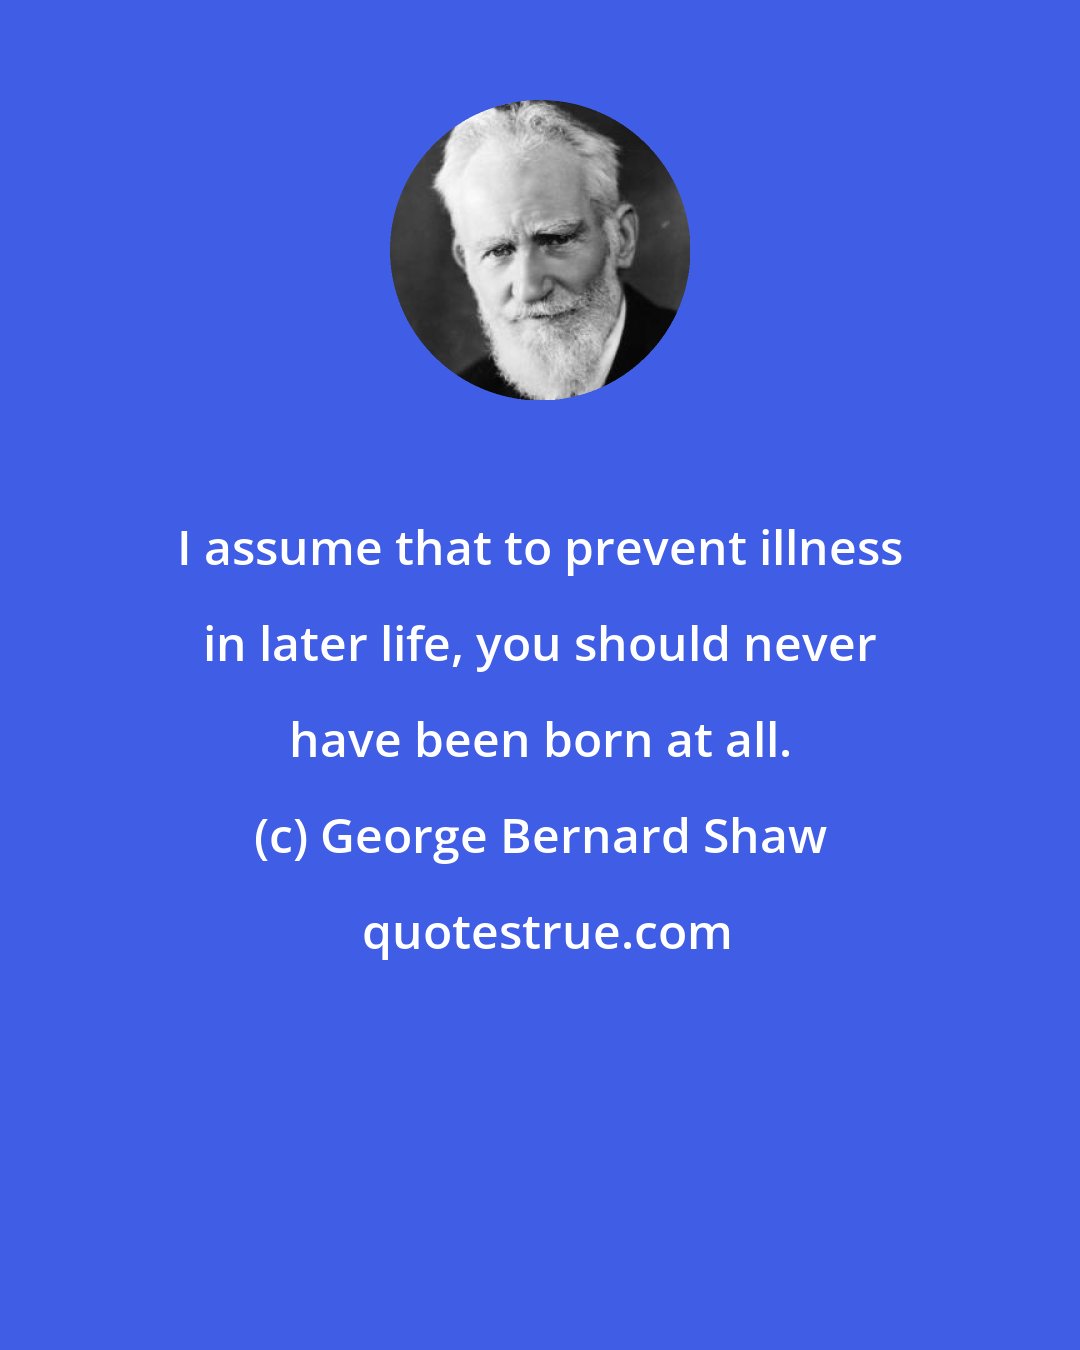 George Bernard Shaw: I assume that to prevent illness in later life, you should never have been born at all.